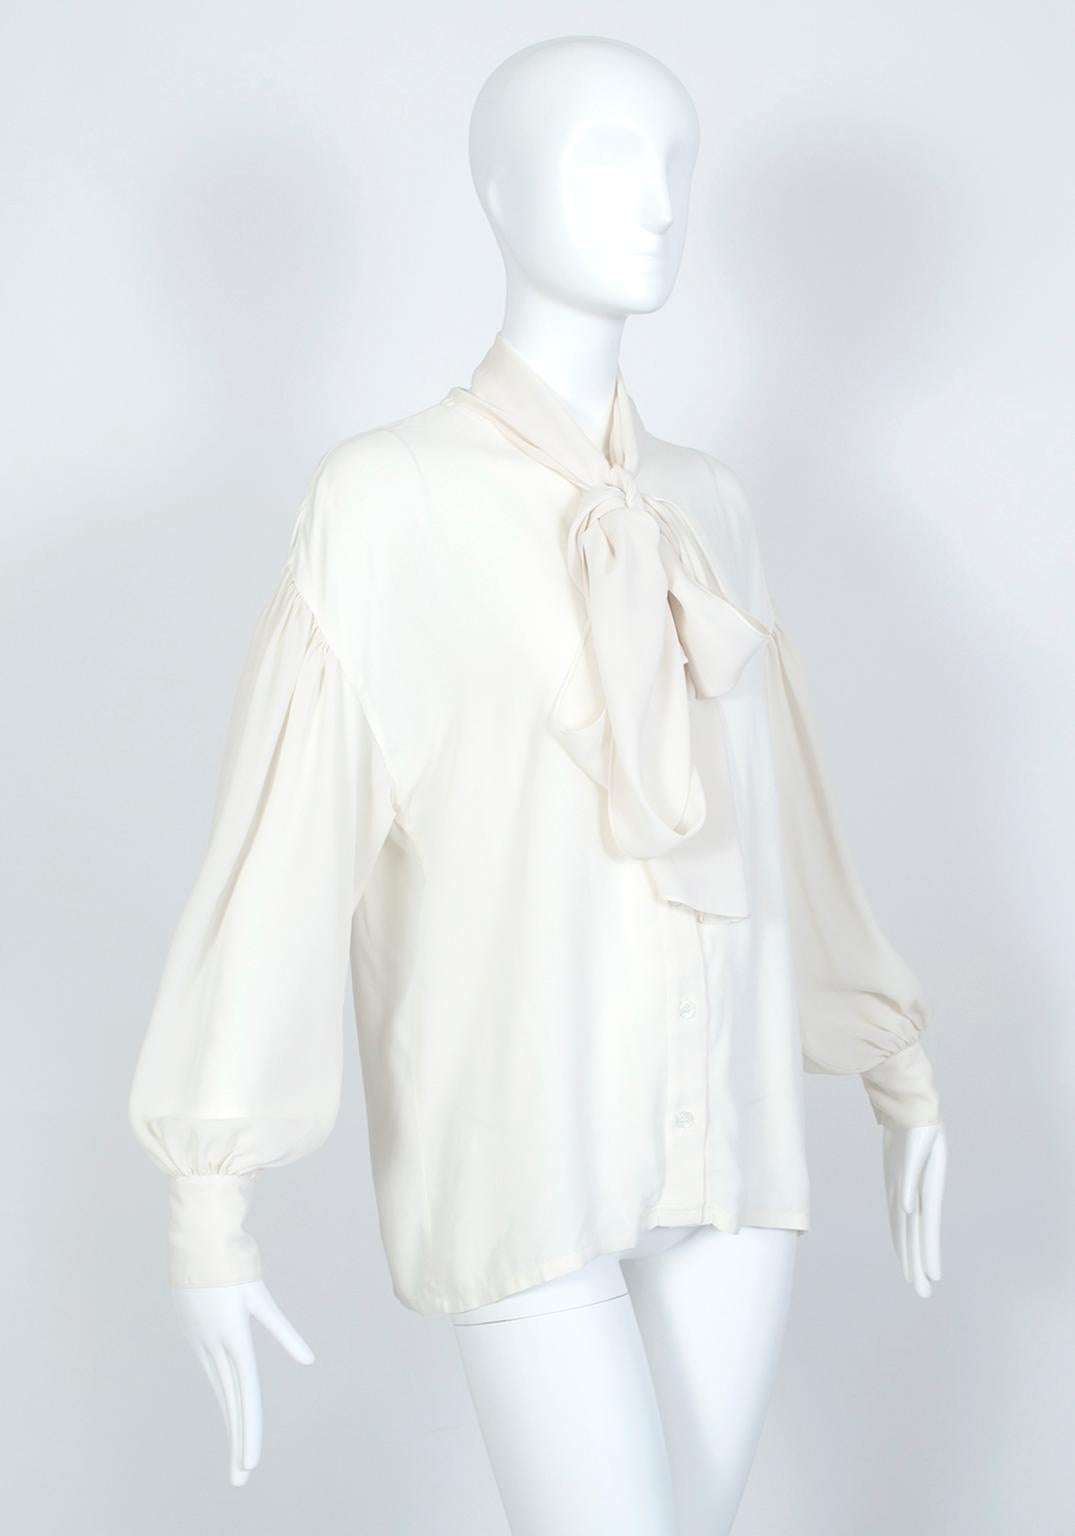 With a seven-foot neck sash and billowing drop sleeves, this romantic blouse offers endless styling possibilities. An ideal work-to-weekend piece, this blouse will mix seamlessly into your existing wardrobe but keeps your ensembles looking fresh